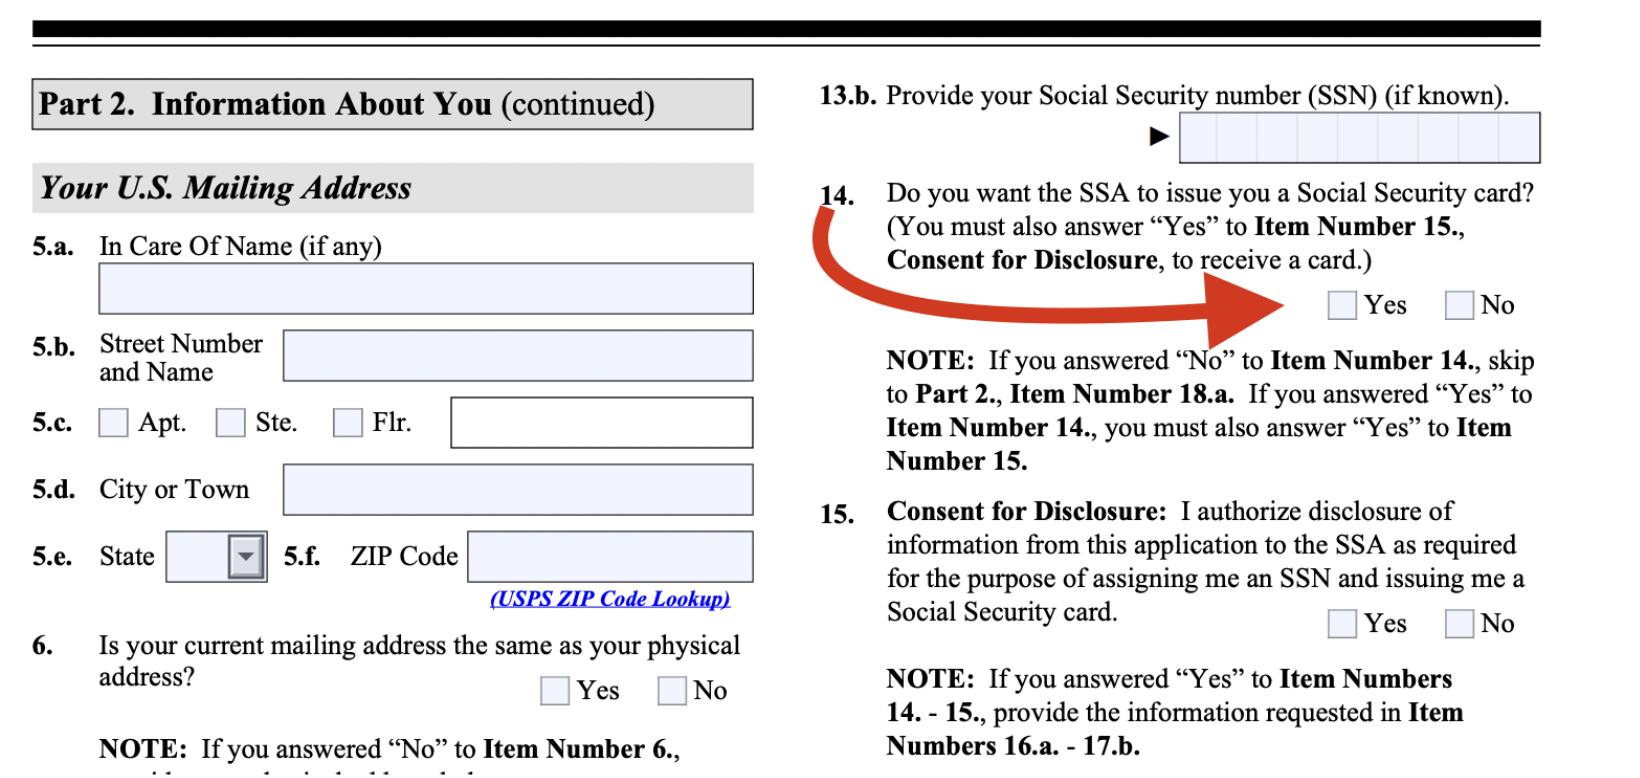 Image of USCIS Form I-765, Part 2 with a red arrow pointing to Question 14